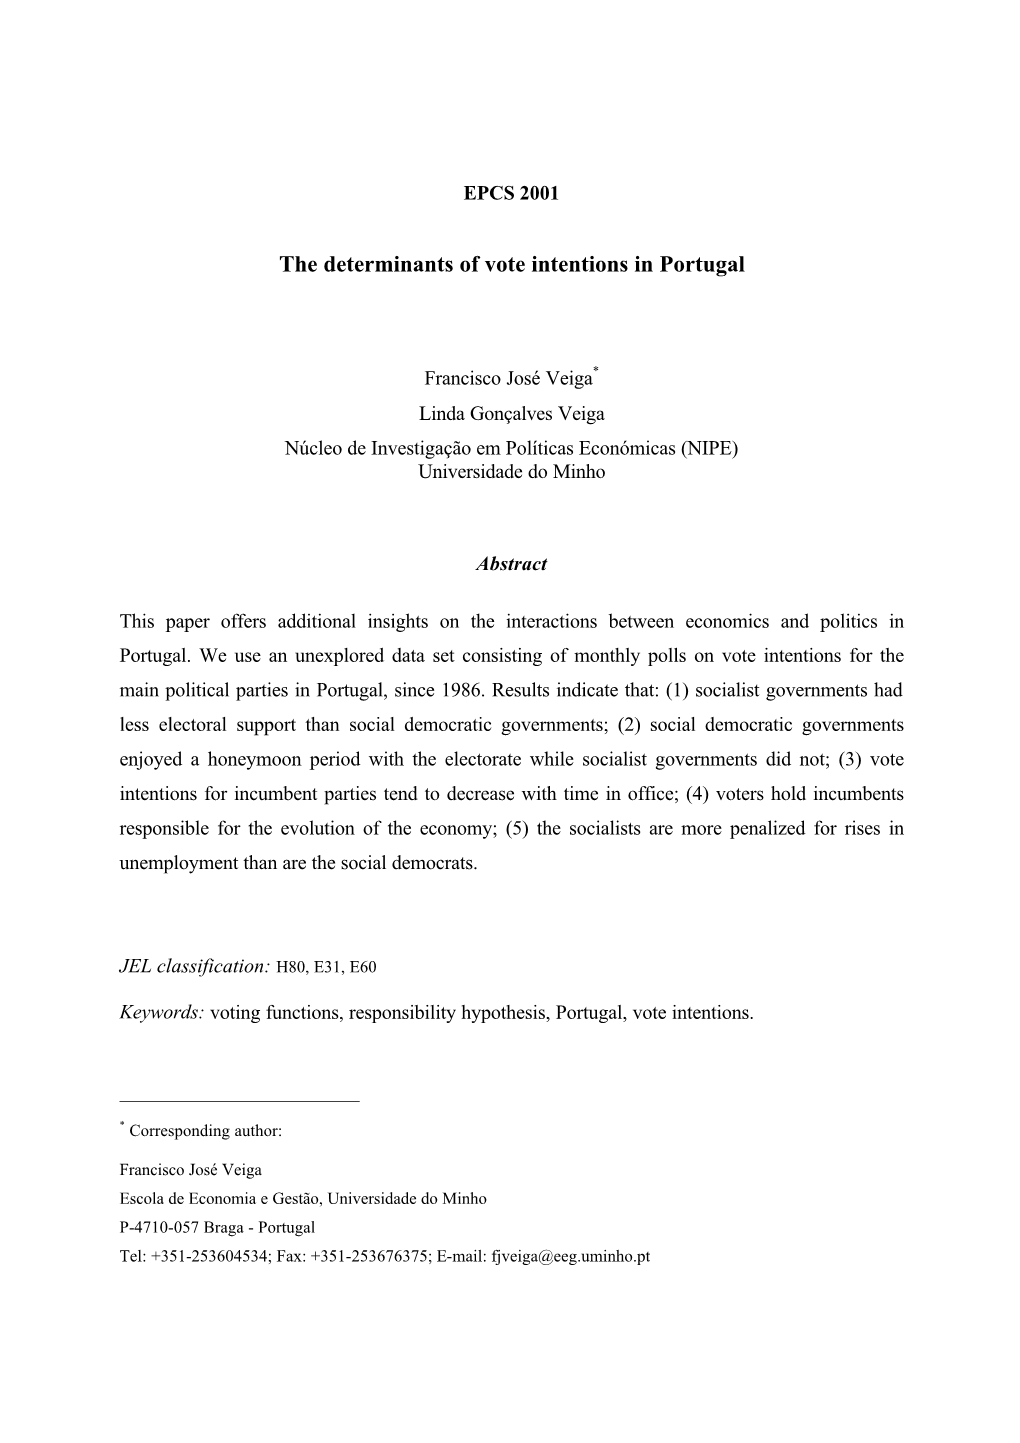 The Determinants of Vote Intentions in Portugal